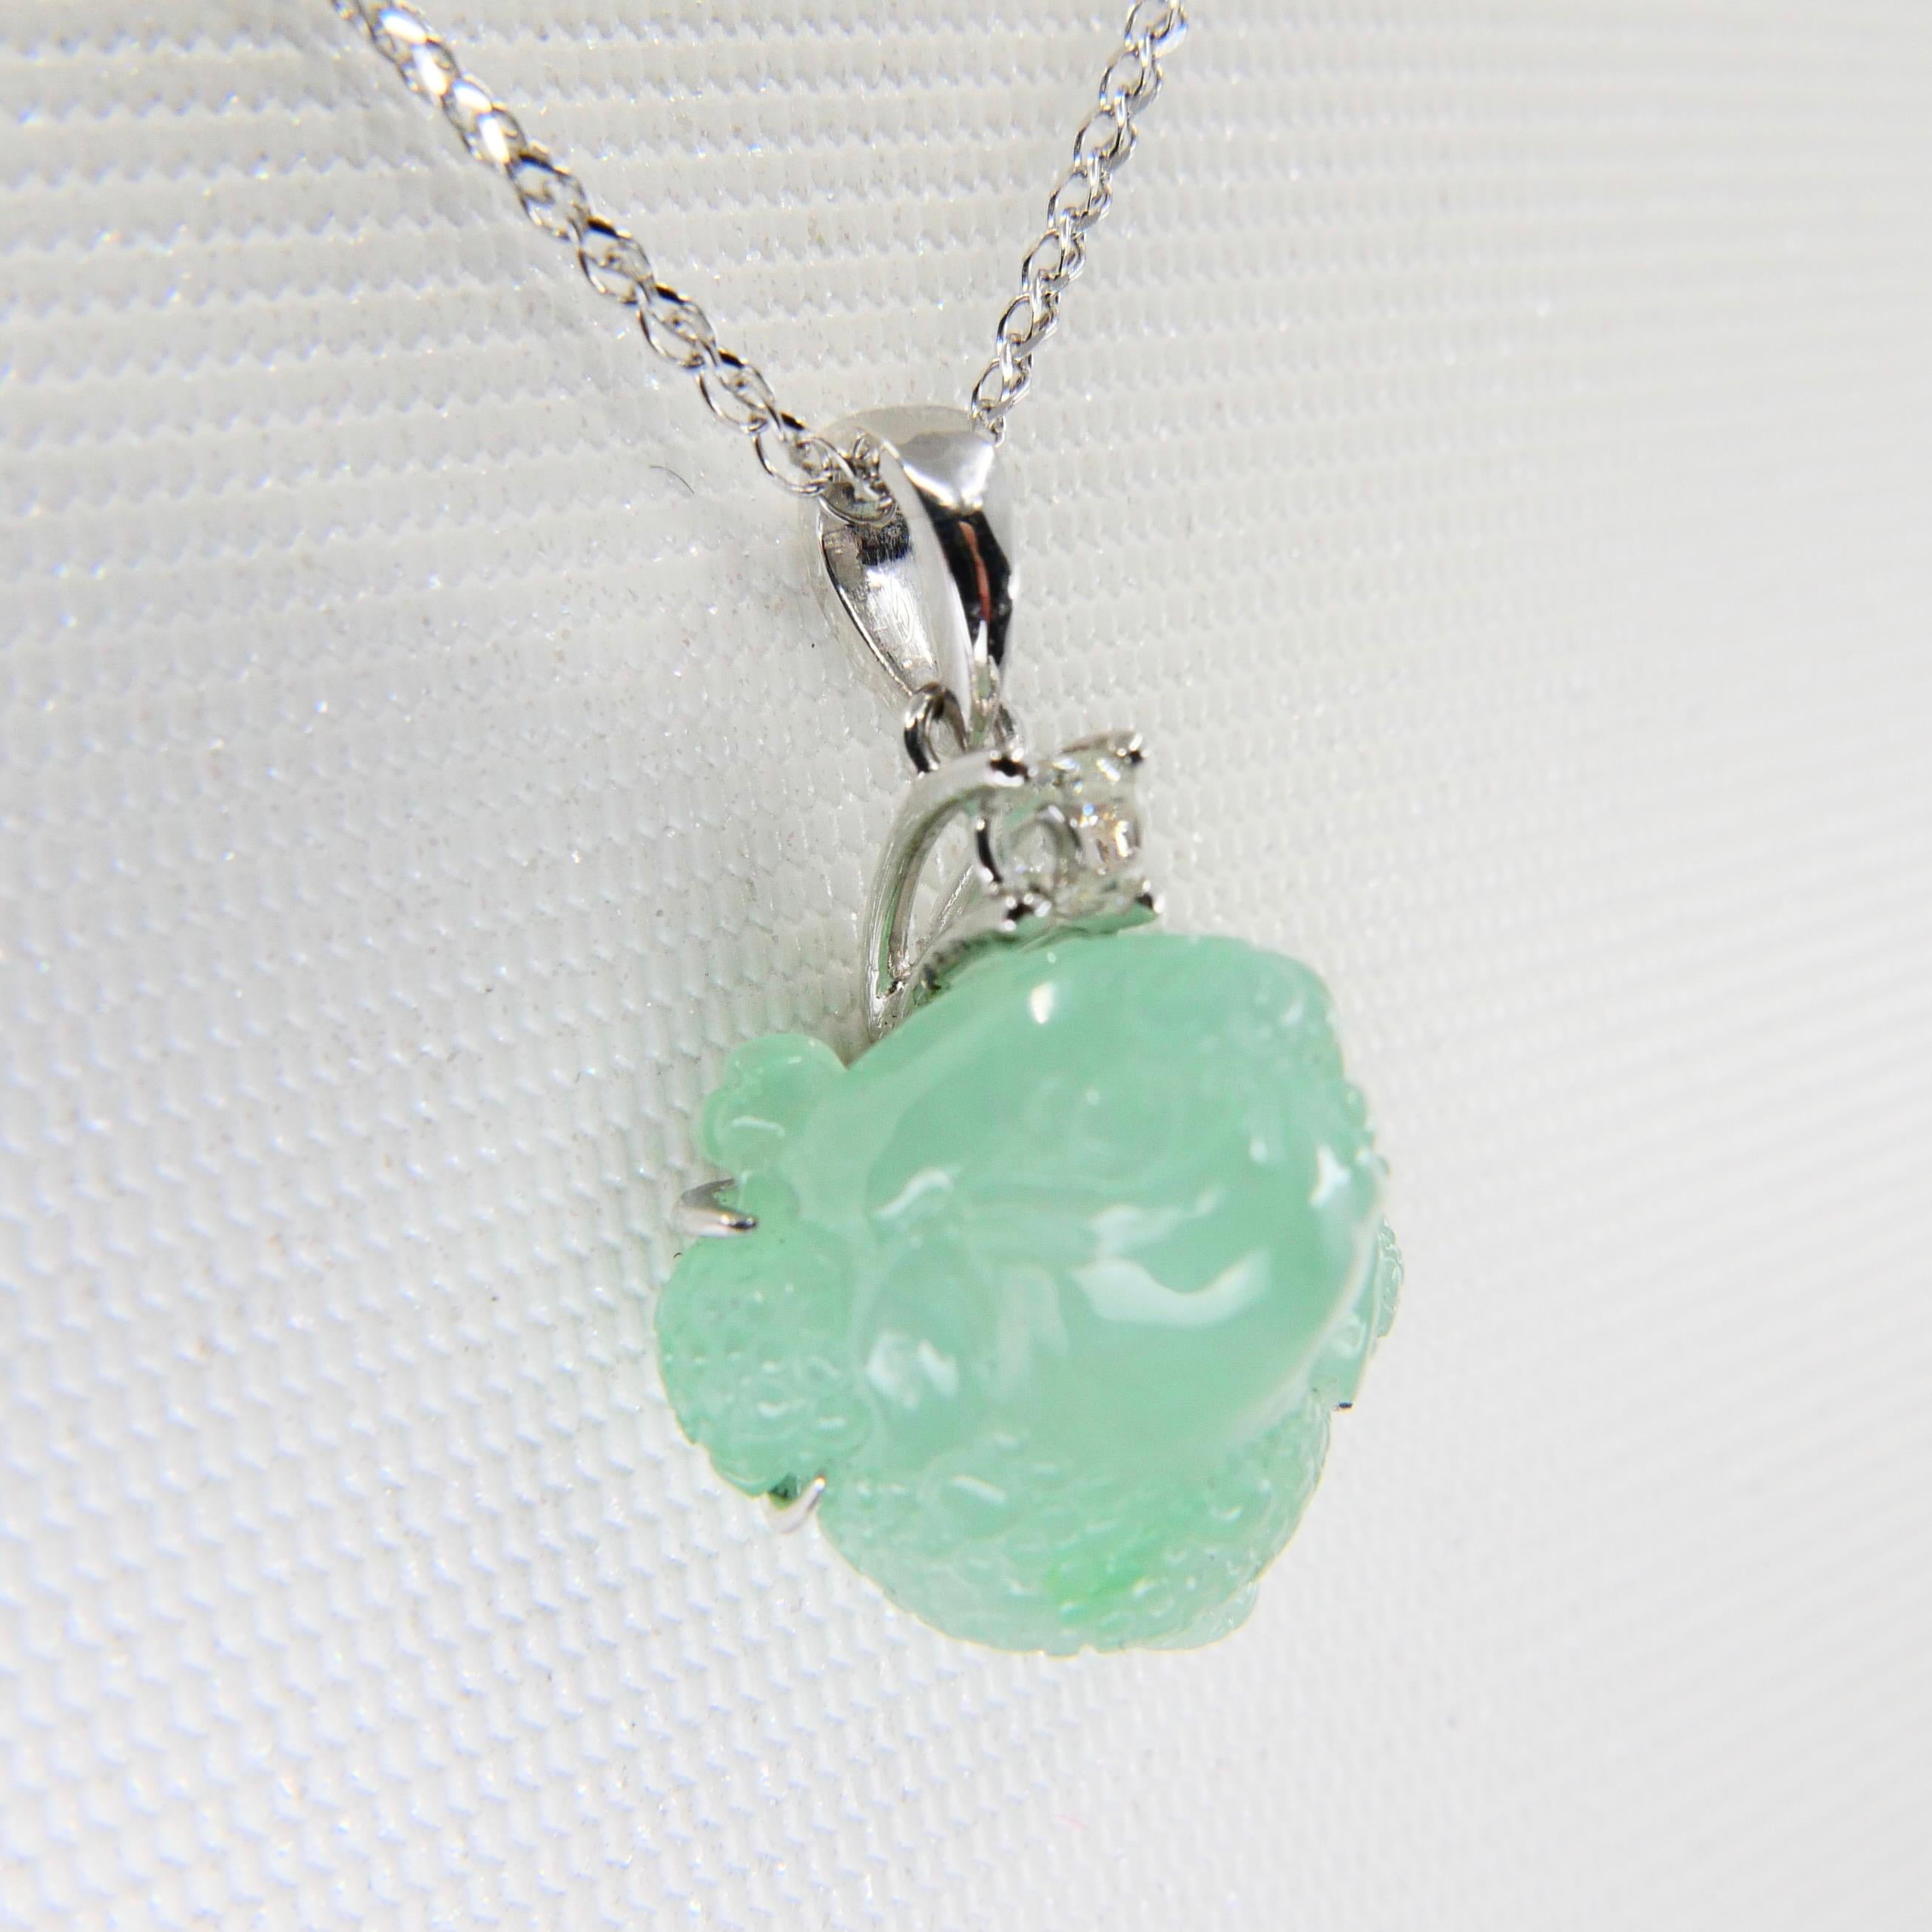 Certified Type A Jade Mythical Beast Drop Pendant Necklace, Icy Green 5